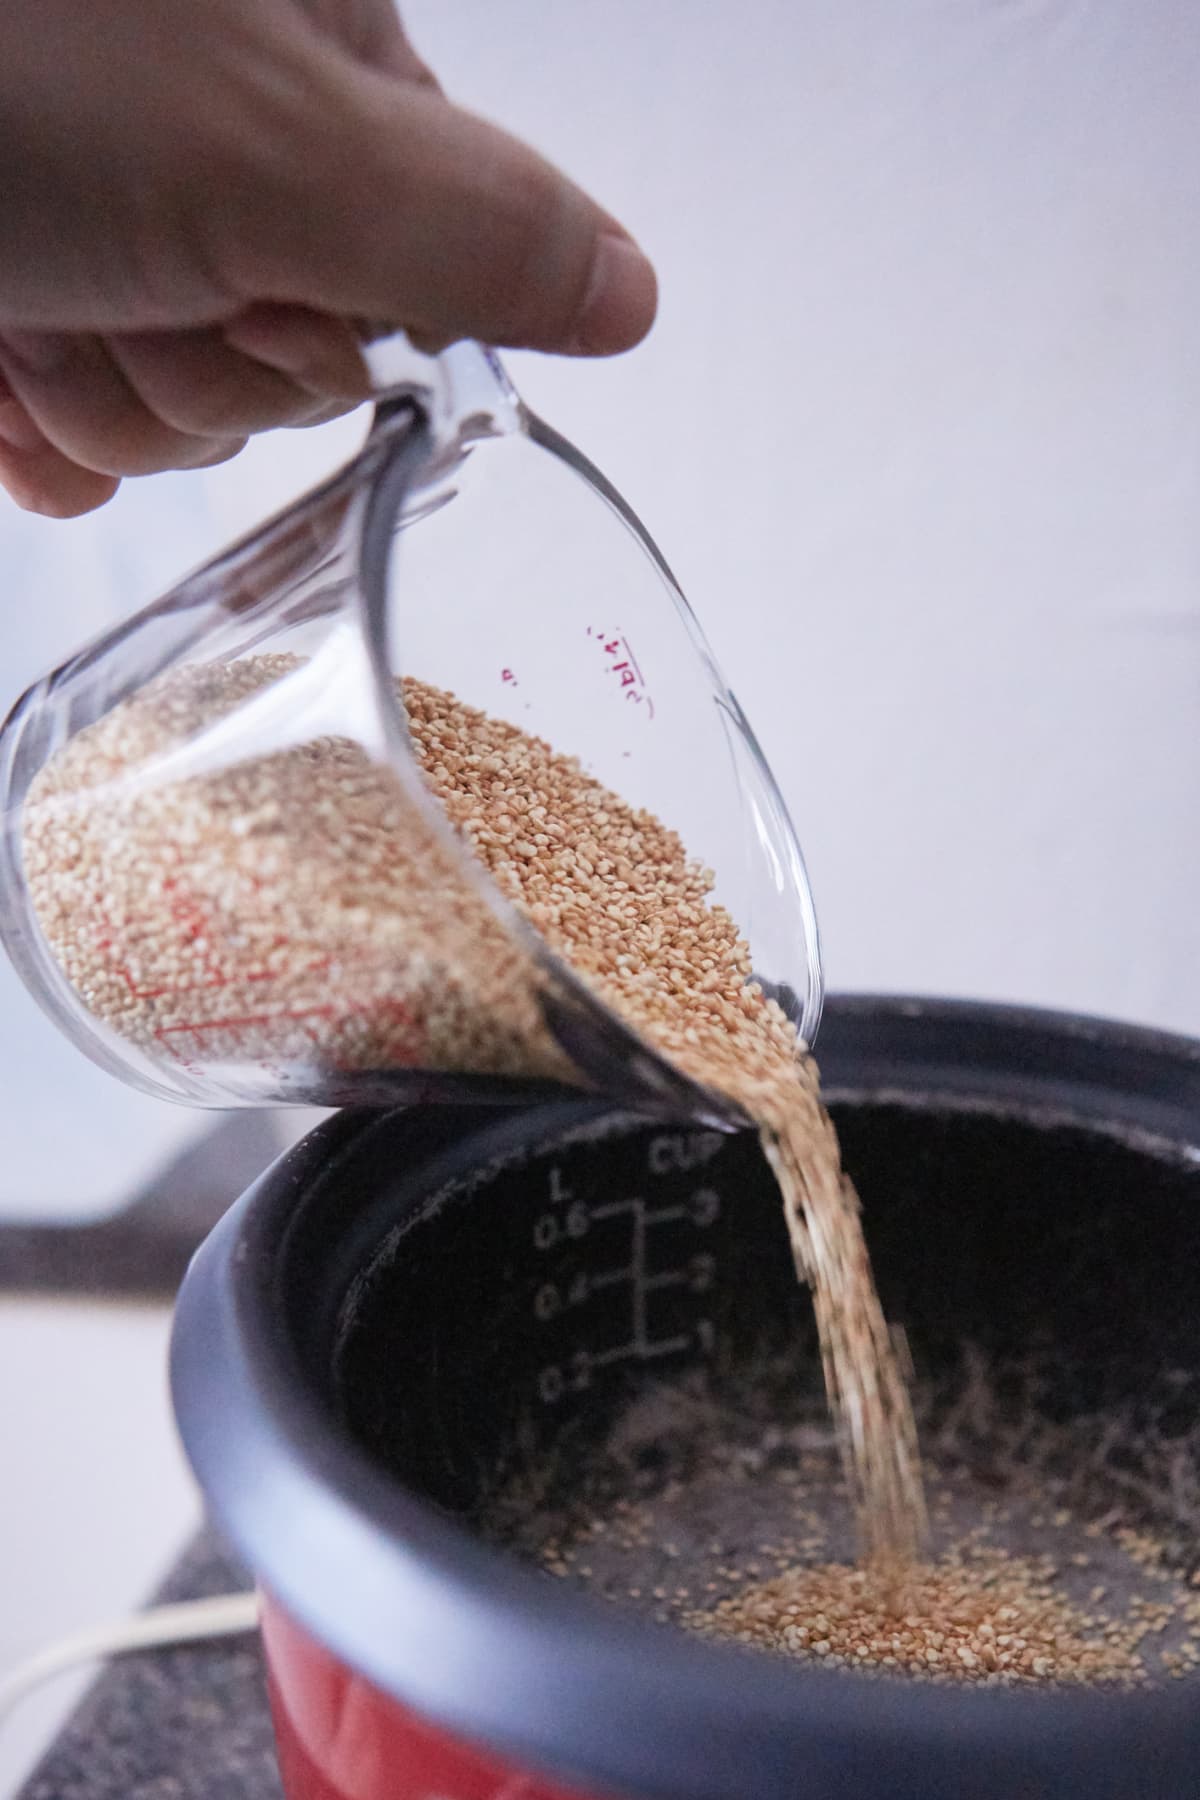 Quinoa being poured into a pot of boiling water